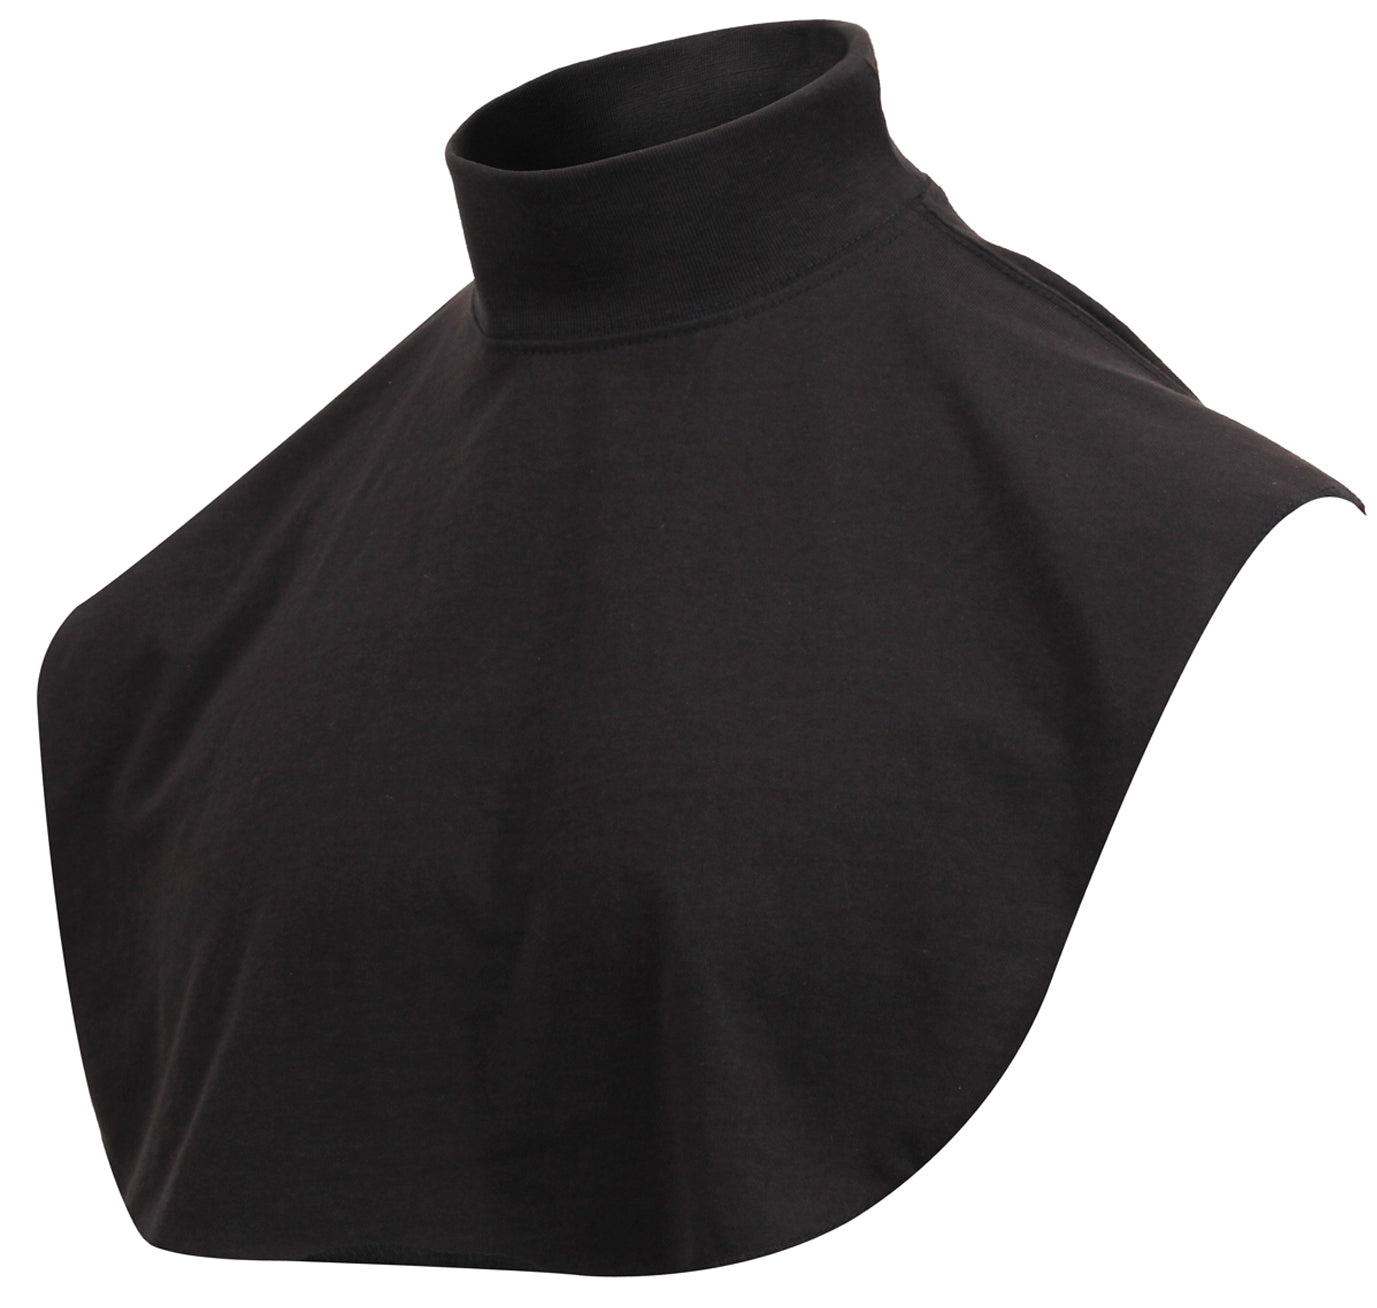 Rothco Black Mock Turtle Neck Dickie - Adult Unisex Dickey Small-2XL